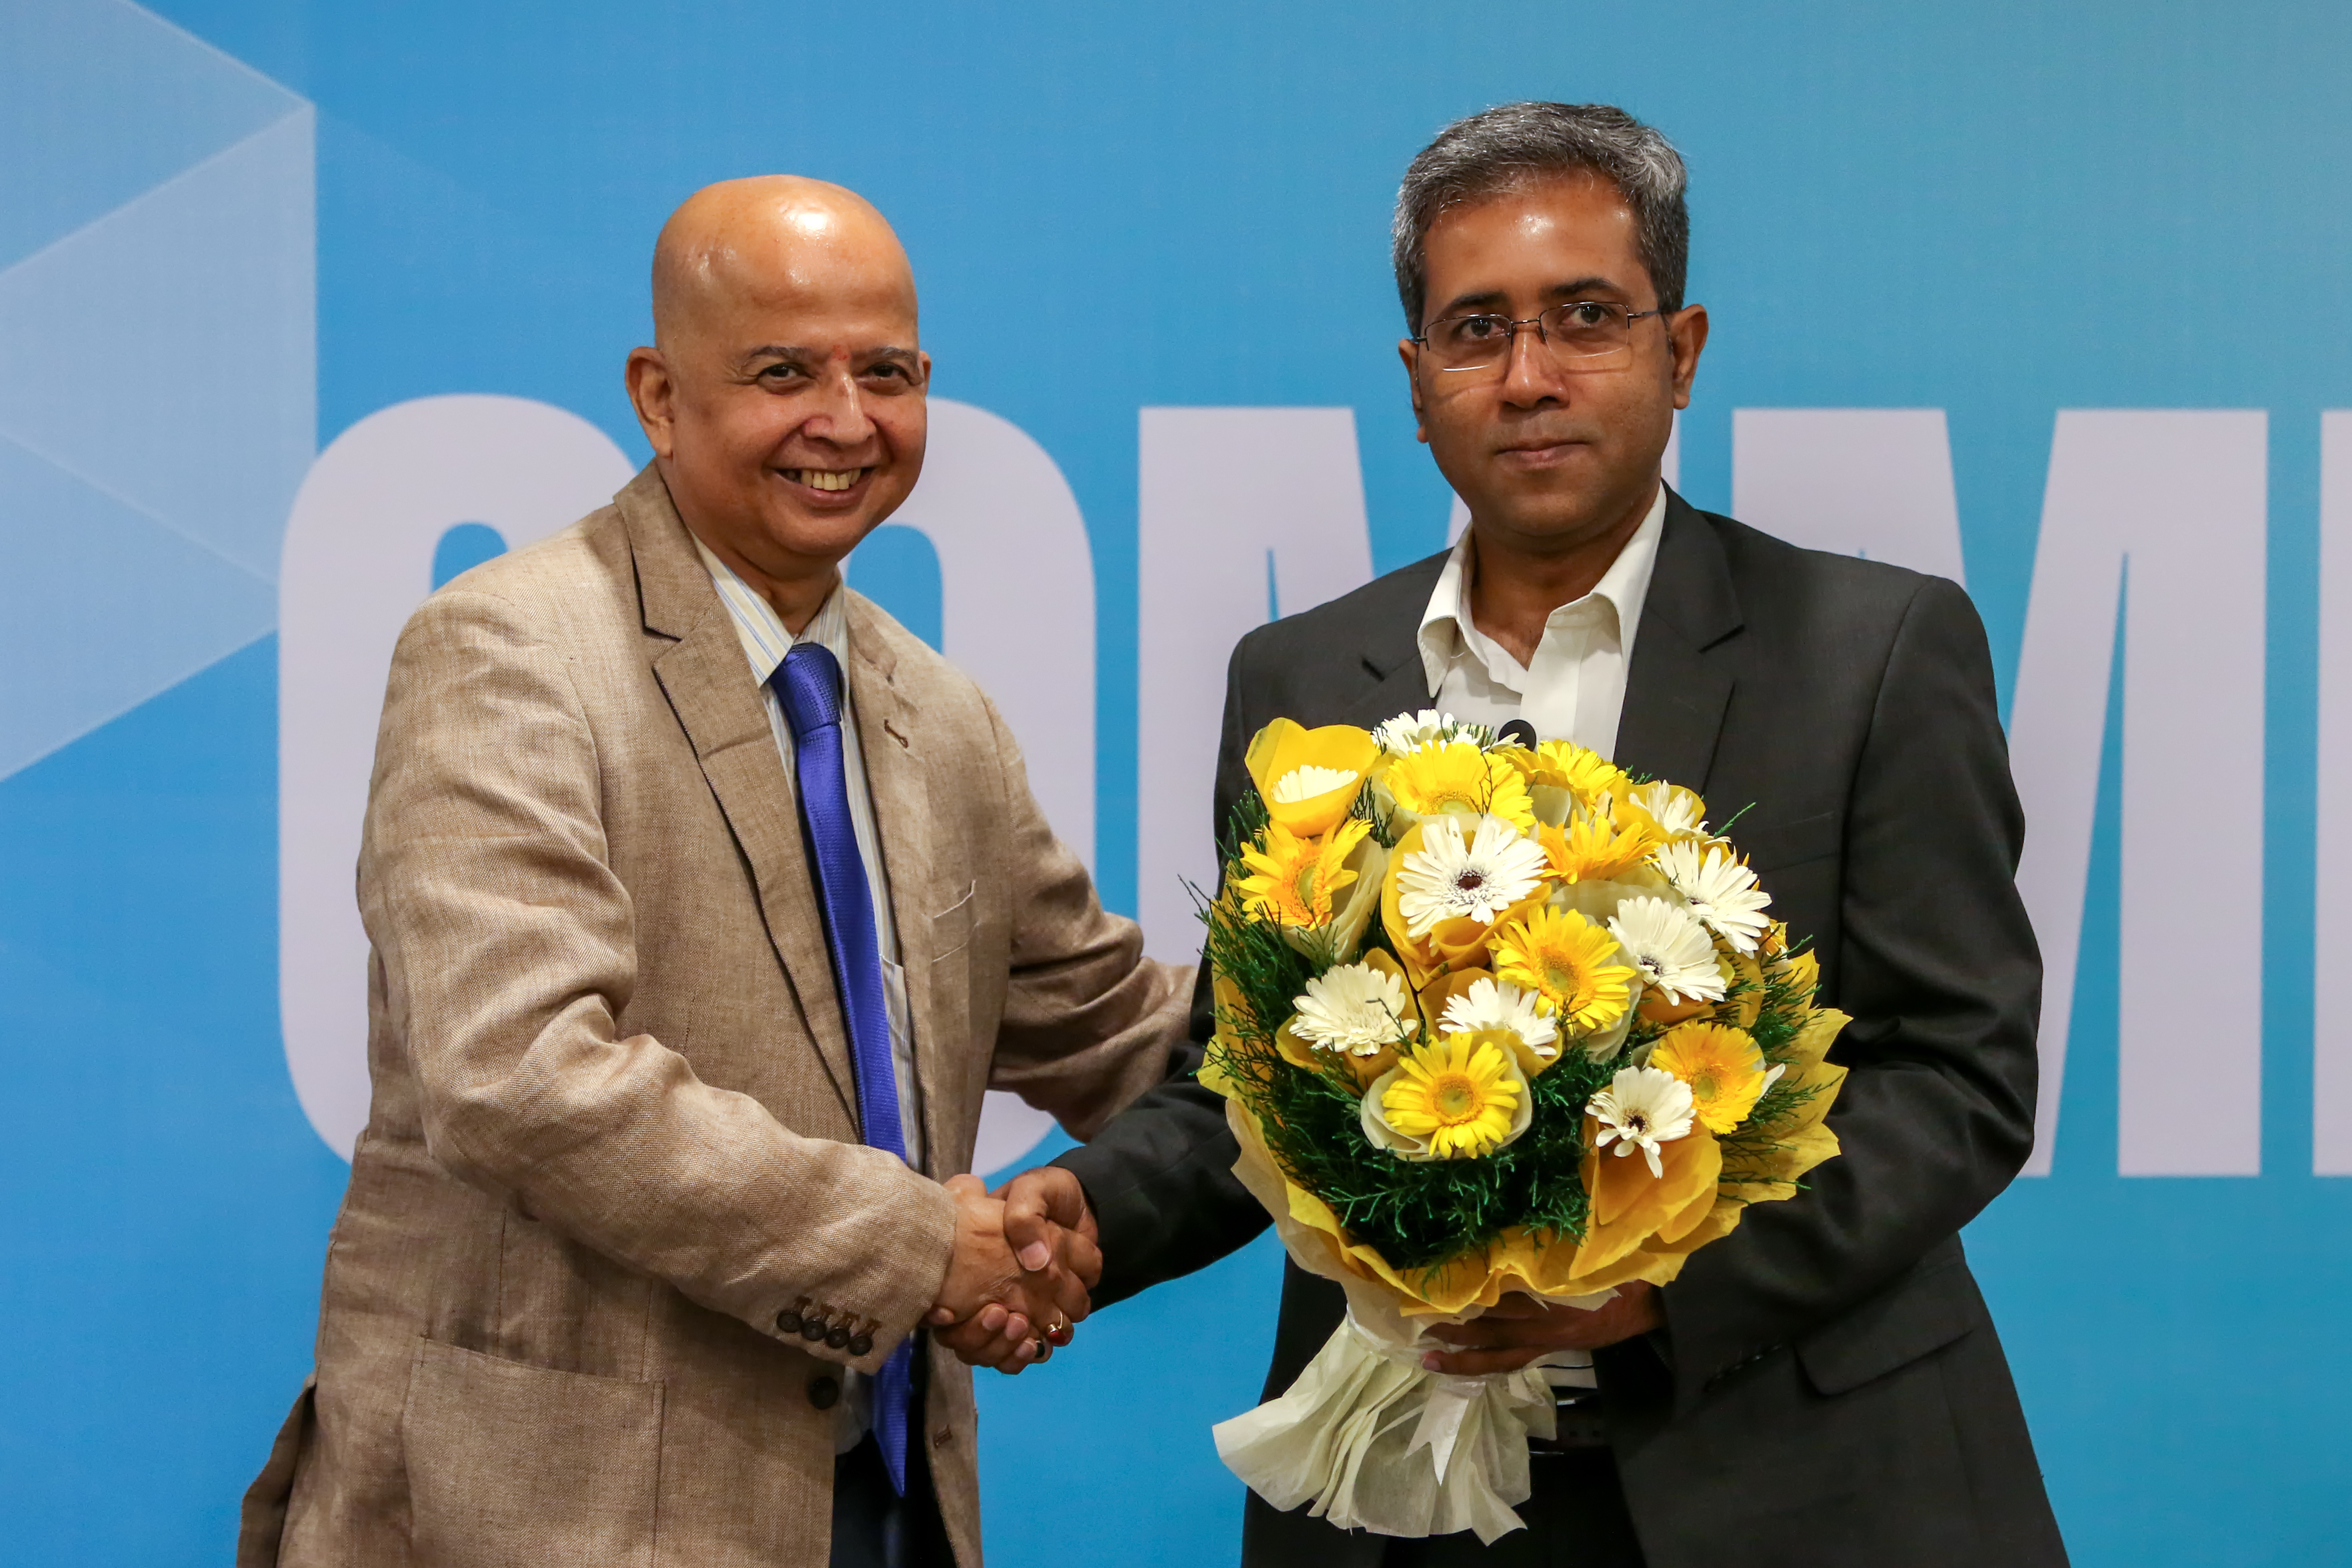 Dr. Debashis Sanyal, Director of Great Lakes Institute of Management, Gurgaon, with Mr. Arindam Mukhopadhyay, Vice President and Global Head of Consulting COE at Gartner